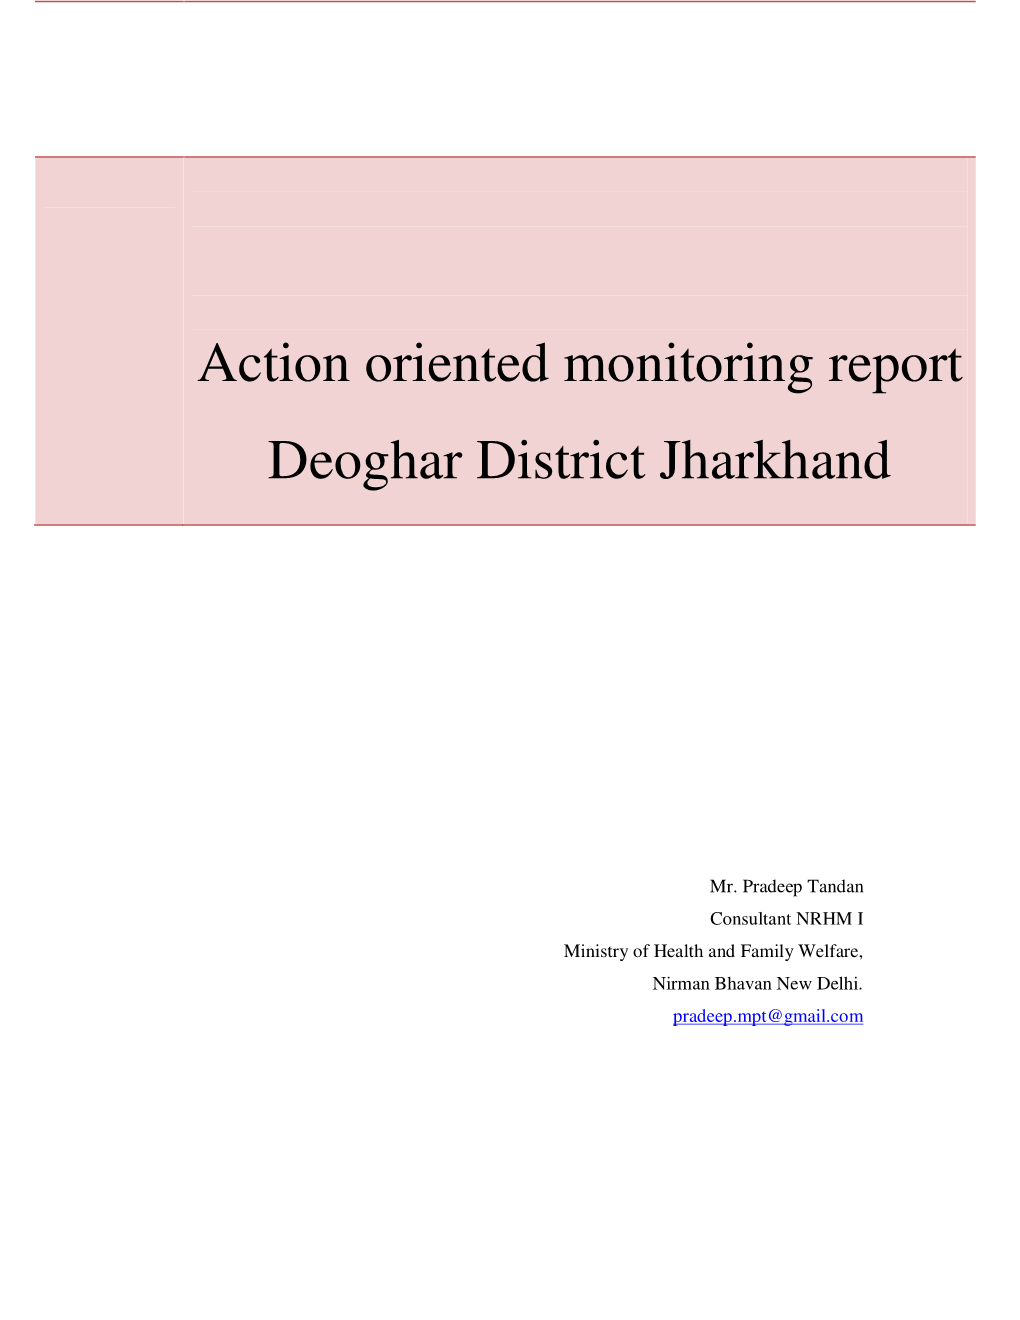 Action Oriented Monitoring Report Deoghar District Jharkhand